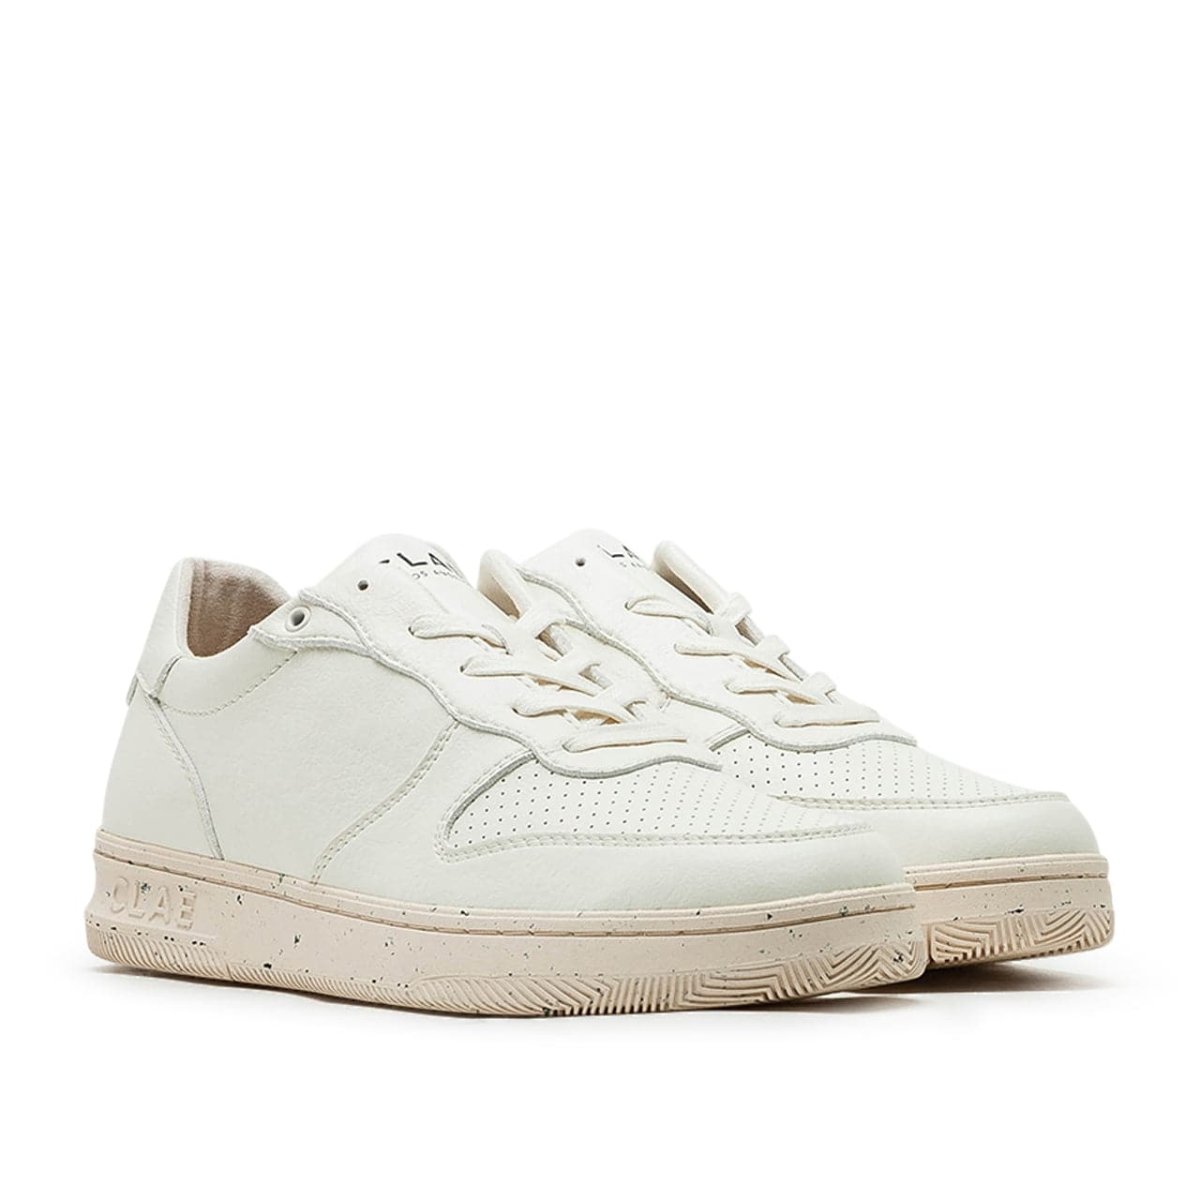 Clae Malone Off White Vegan Chips (Weiss)  - Allike Store